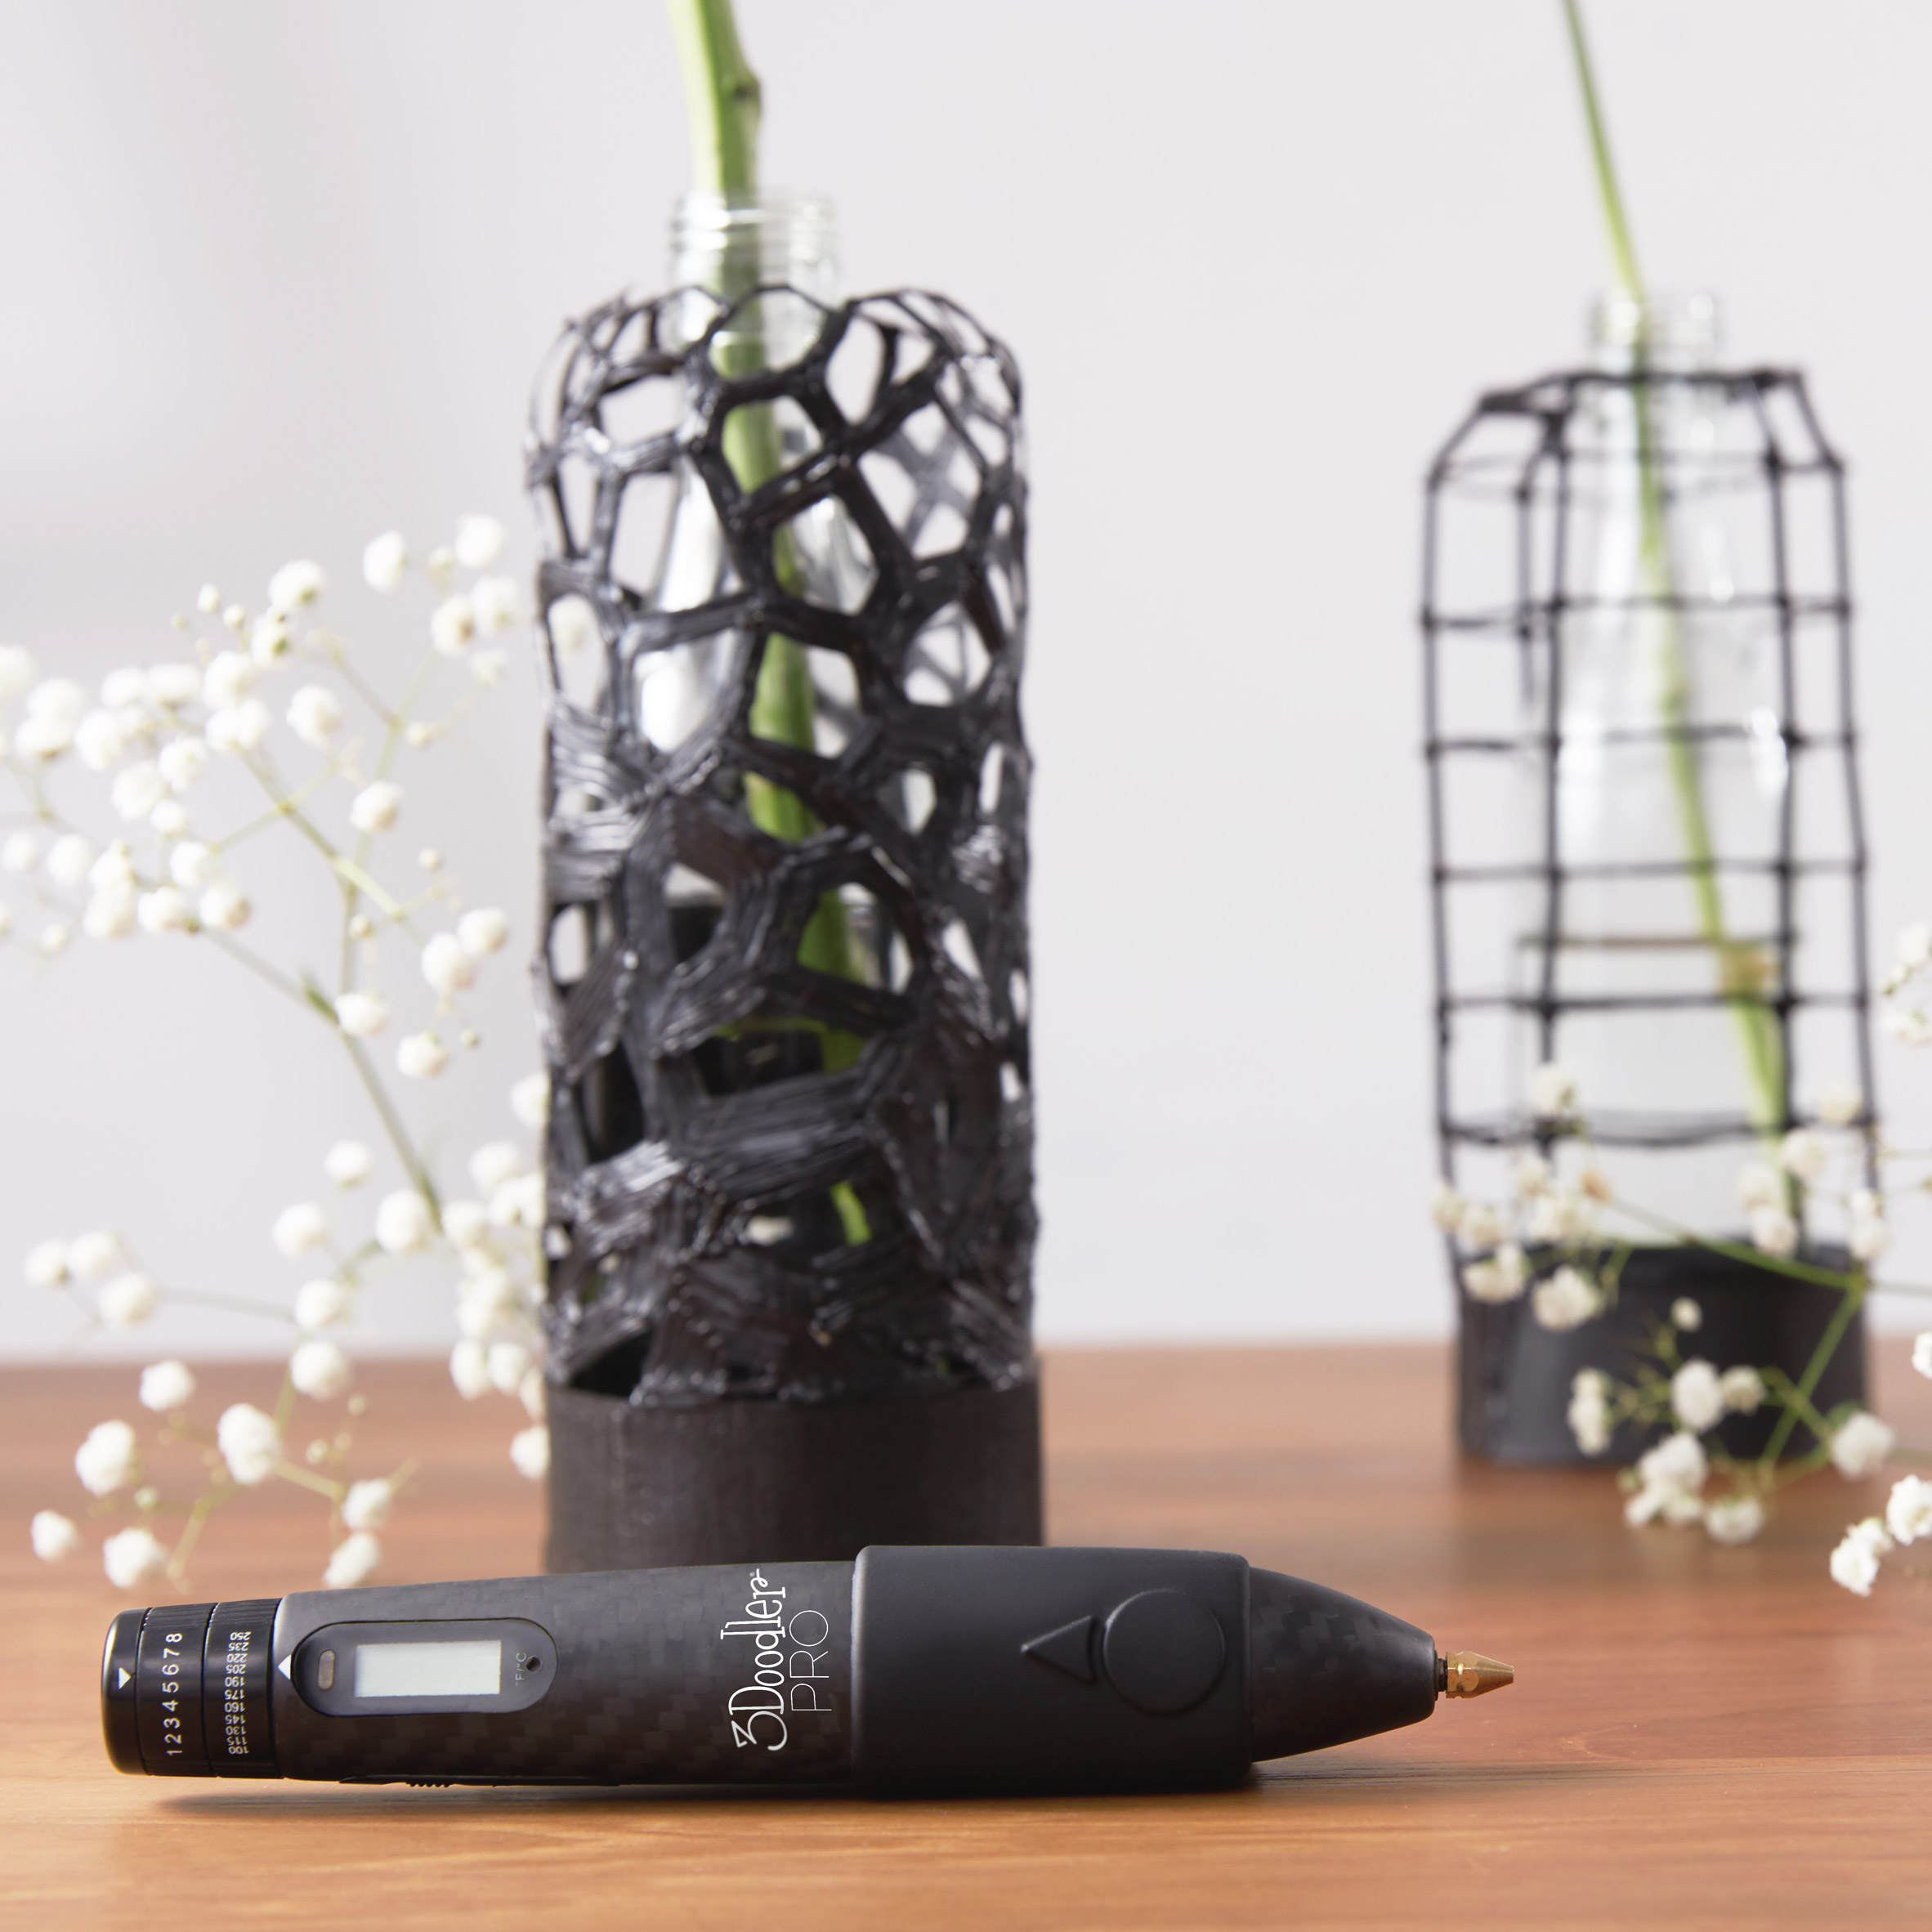 3Doodler 3D-printing pen launches in professional version